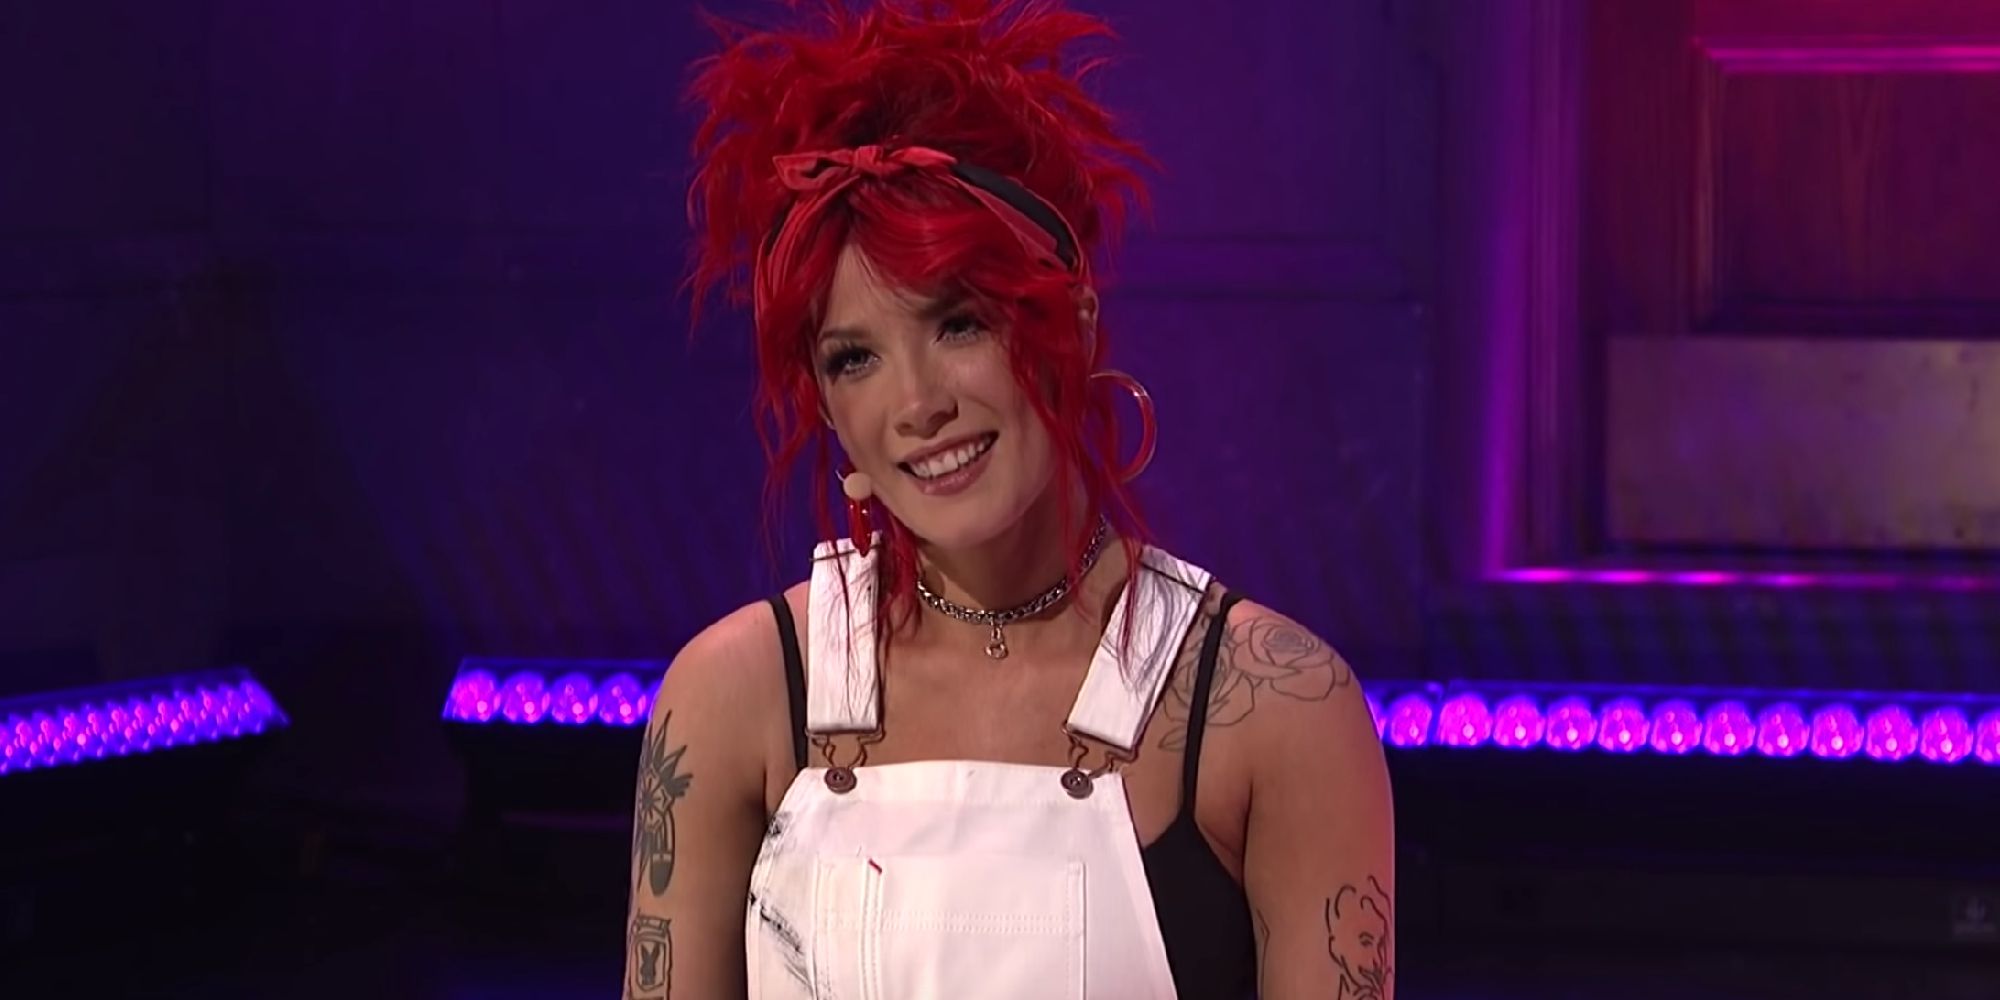 Halsey after performing "Eastside" on SNL in 2019